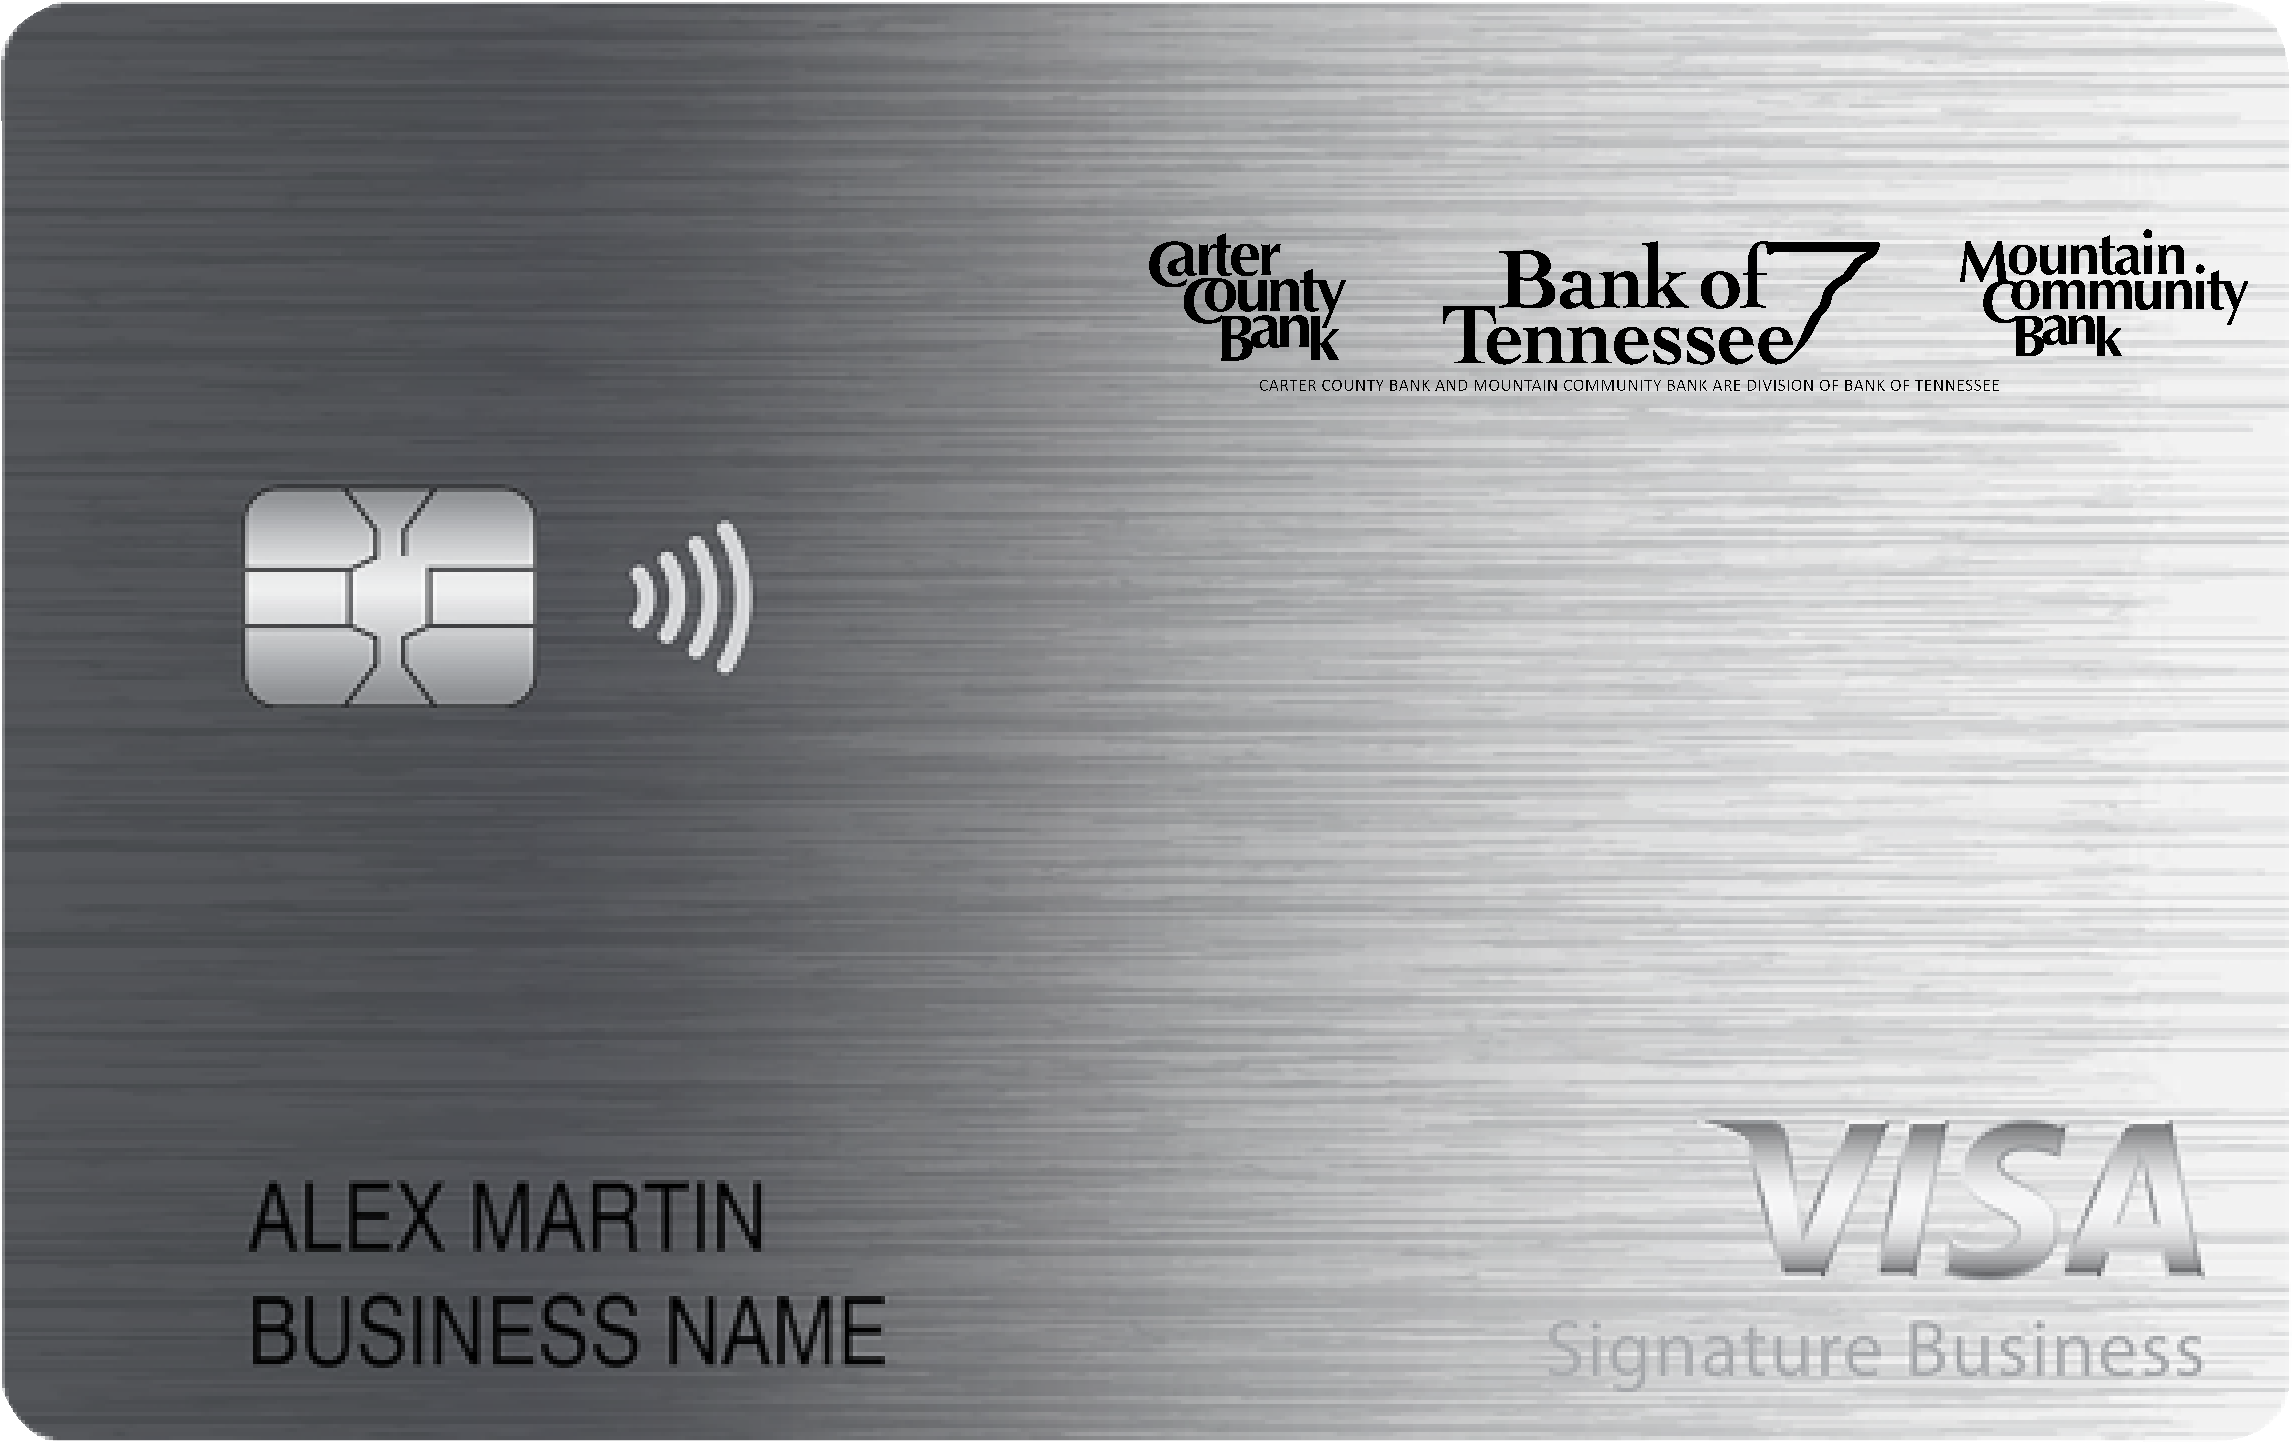 Bank of Tennessee Smart Business Rewards Card